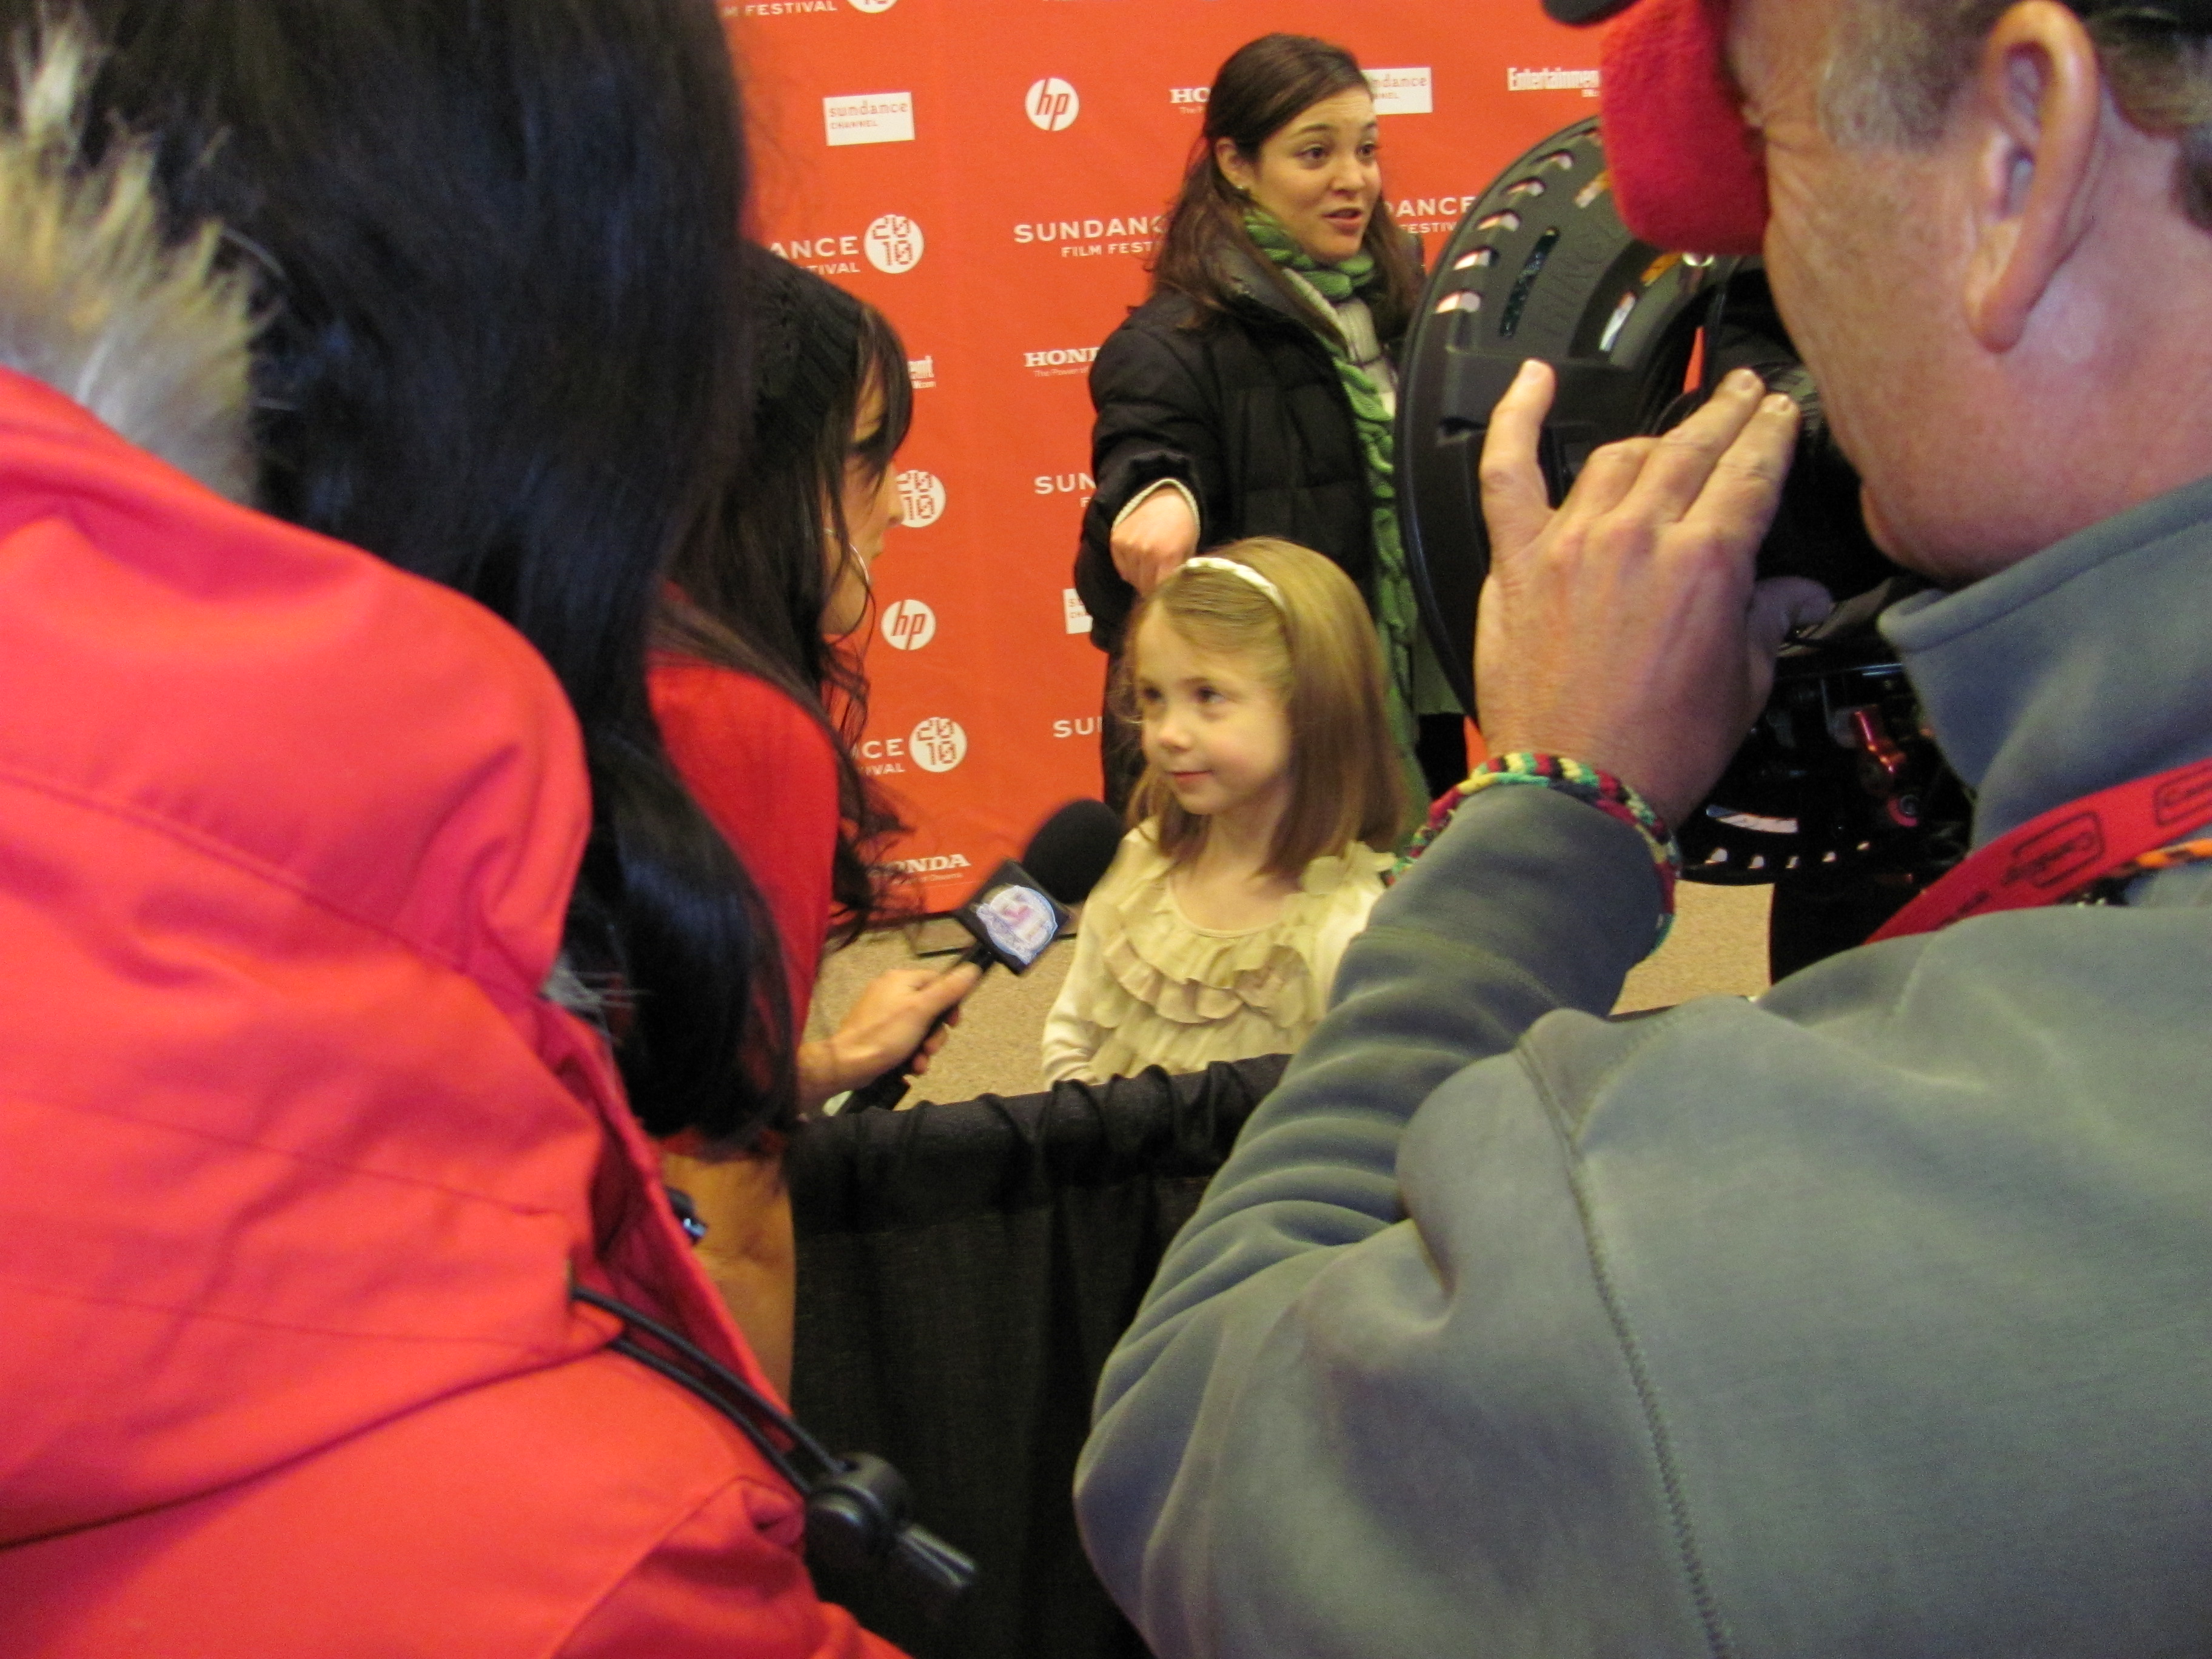 On the red carpet at the Sundance 2010 premiere of Blue Valentine